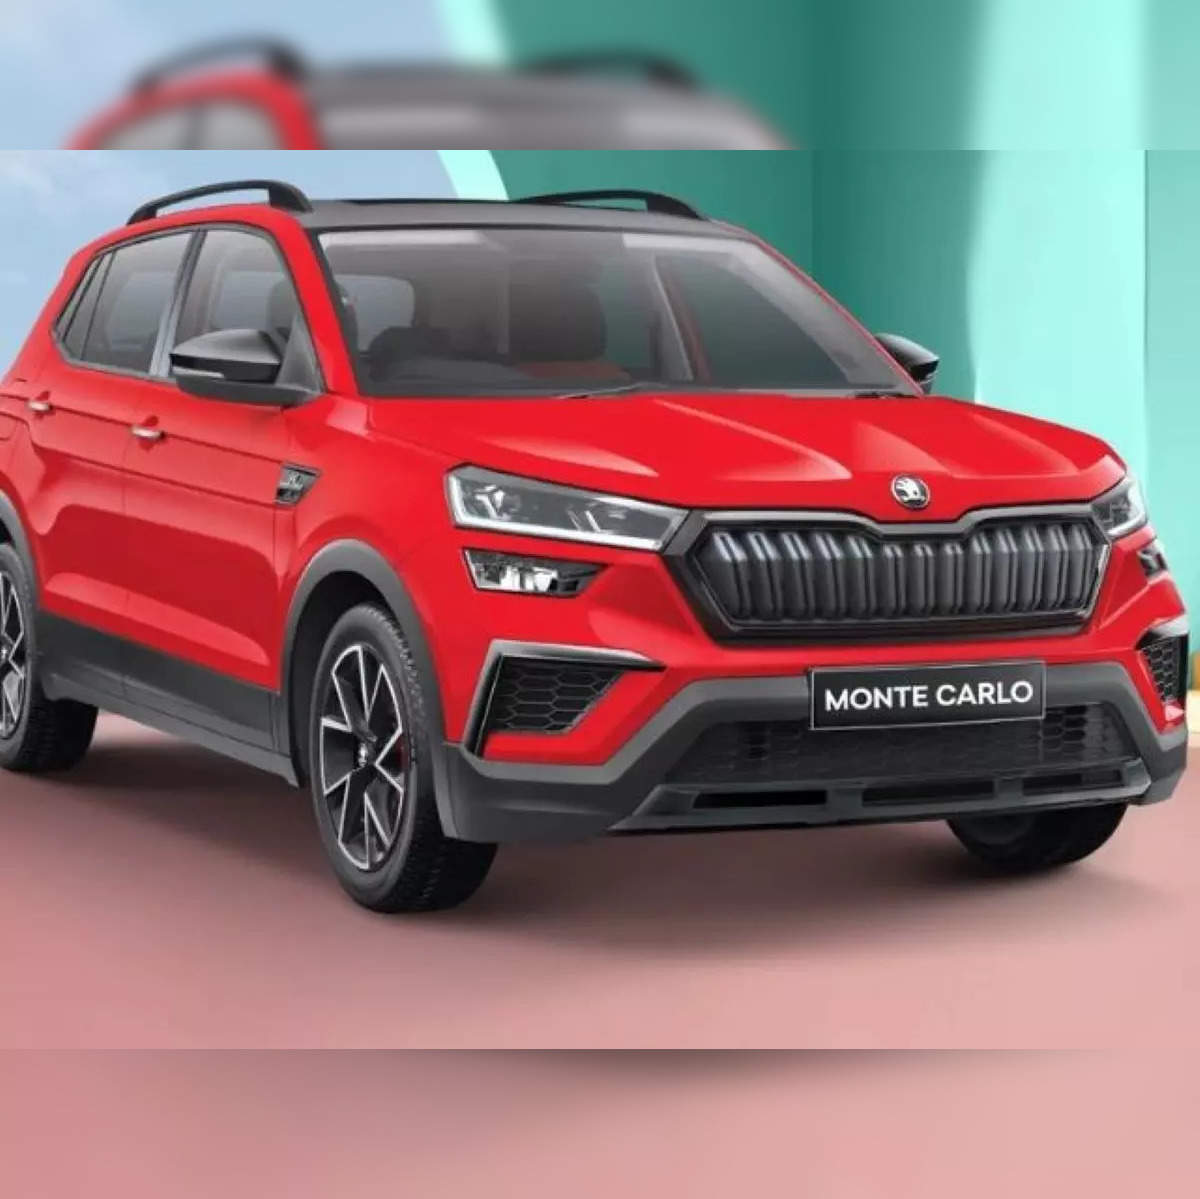 Kushaq Monte Carlo price: Skoda drives in Kushaq Monte Carlo edition with  starting price of Rs 15.99 lakh - The Economic Times